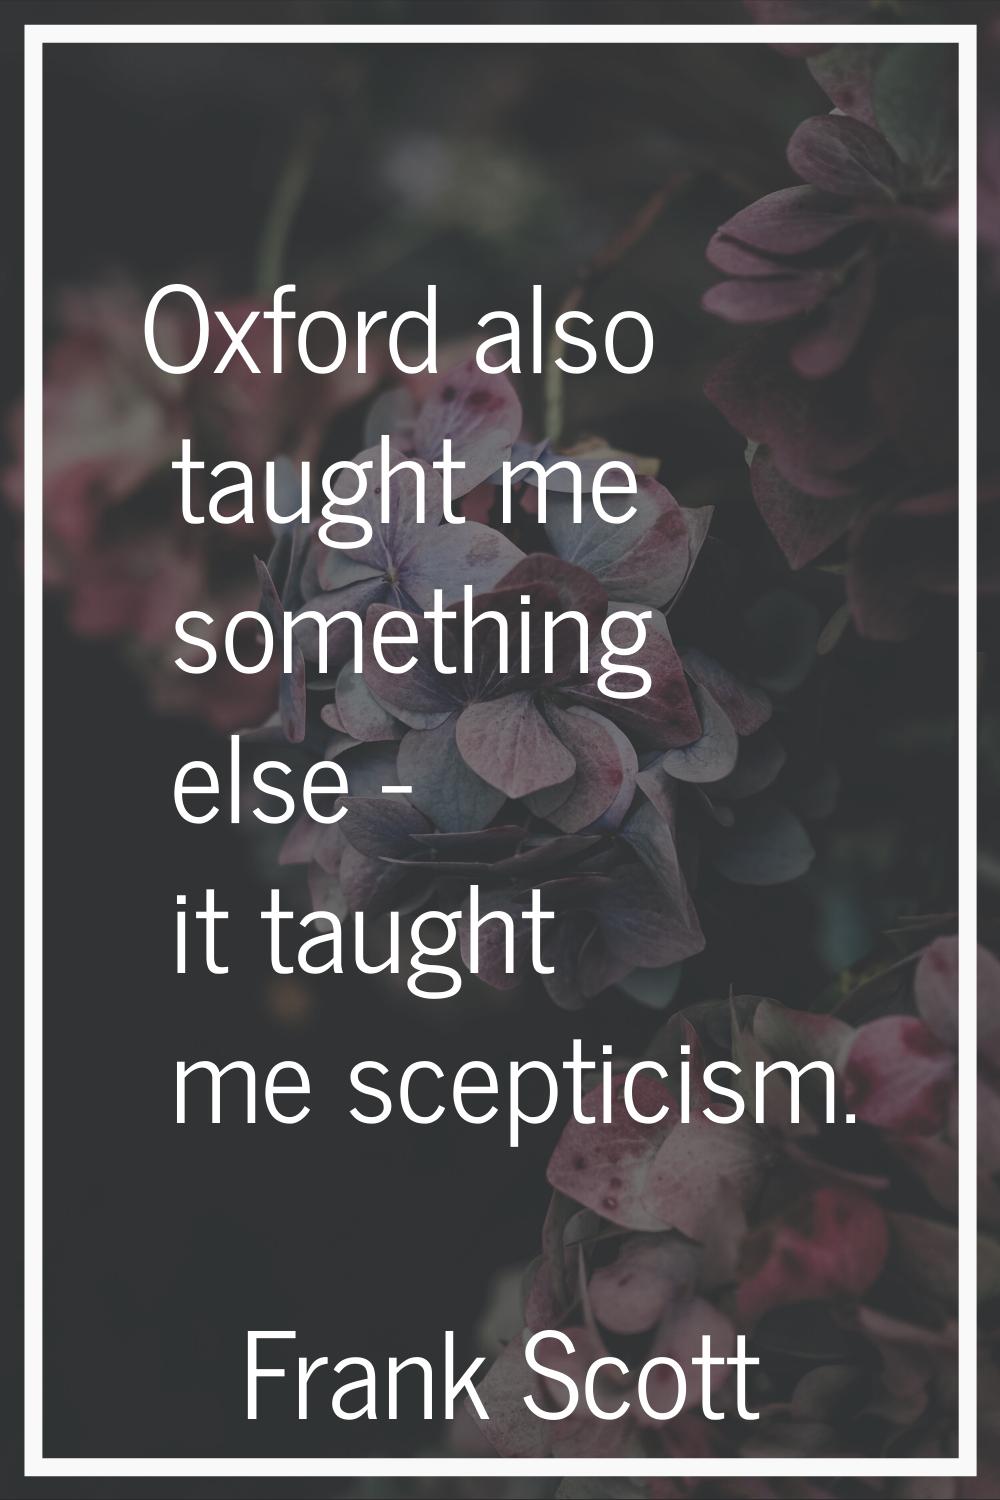 Oxford also taught me something else - it taught me scepticism.